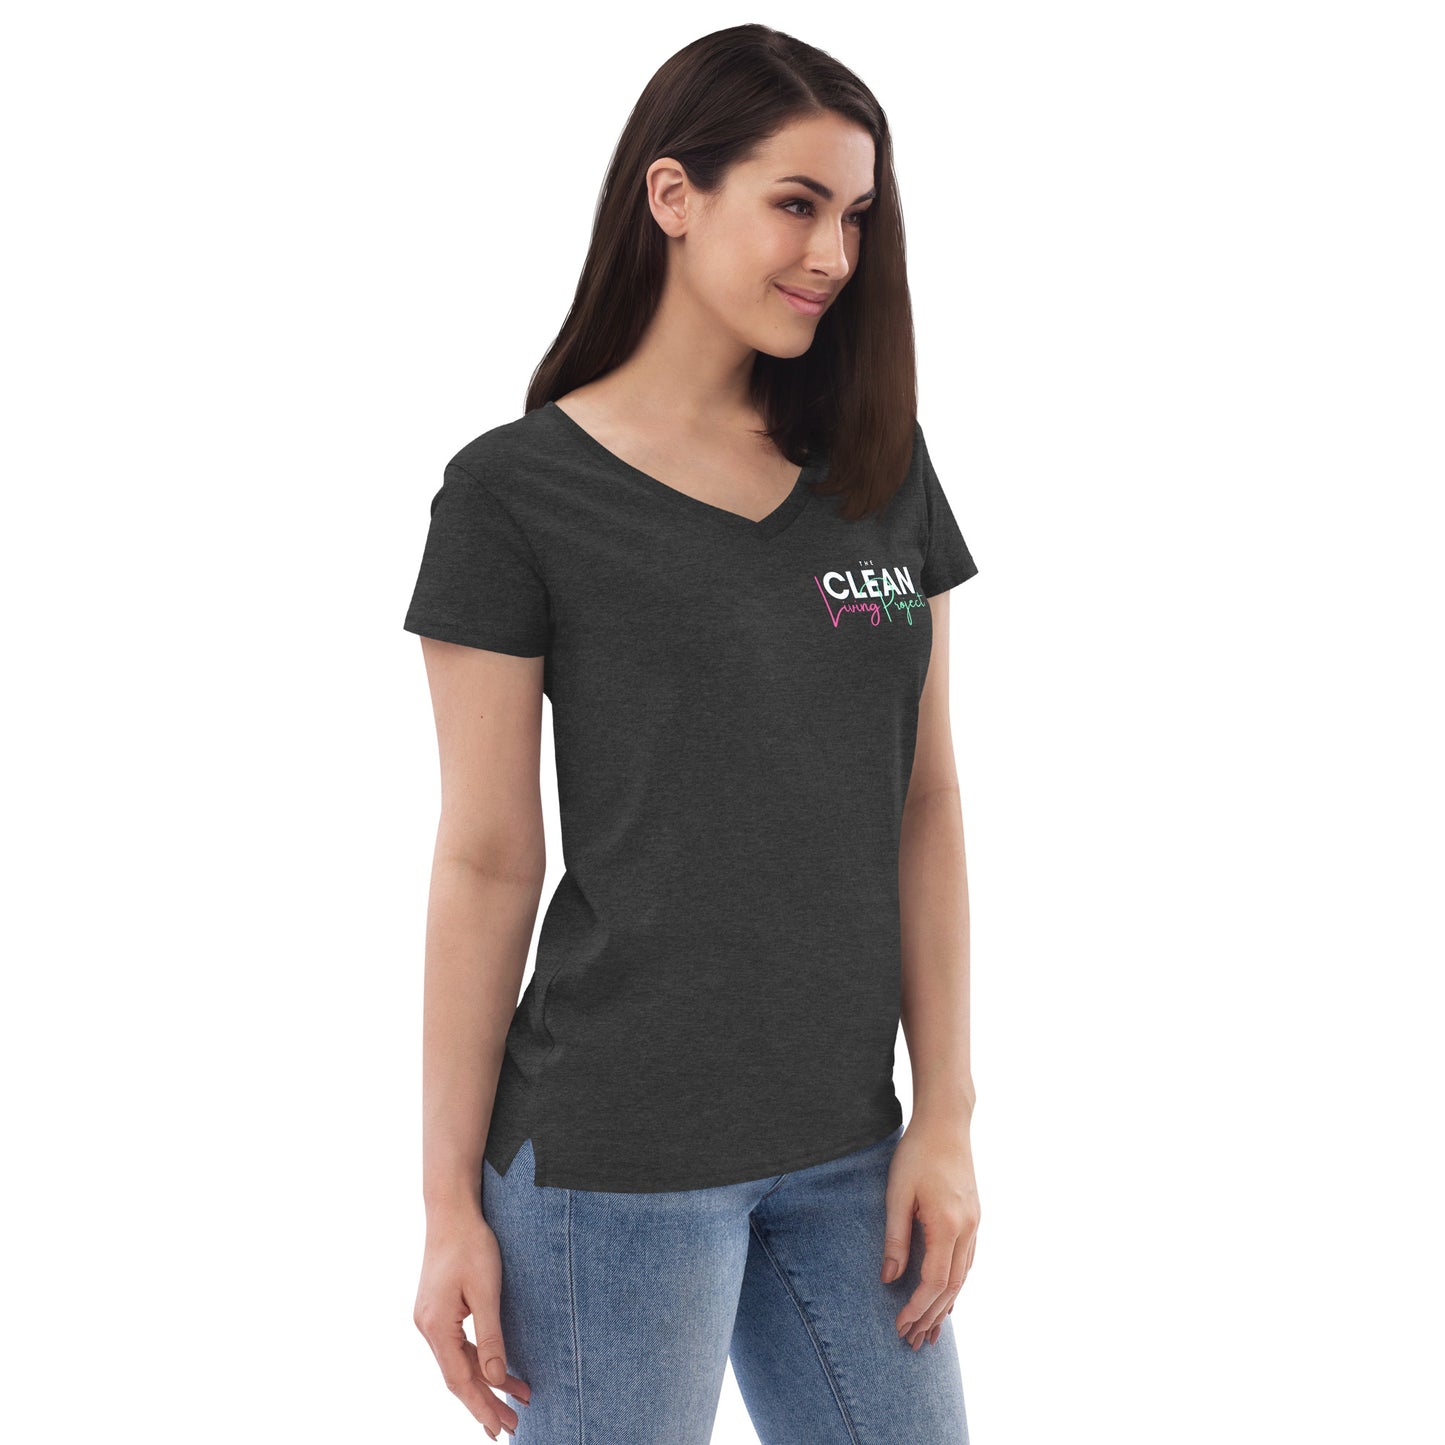 The Clean Living Project Women’s Recycled V-Neck T-Shirt